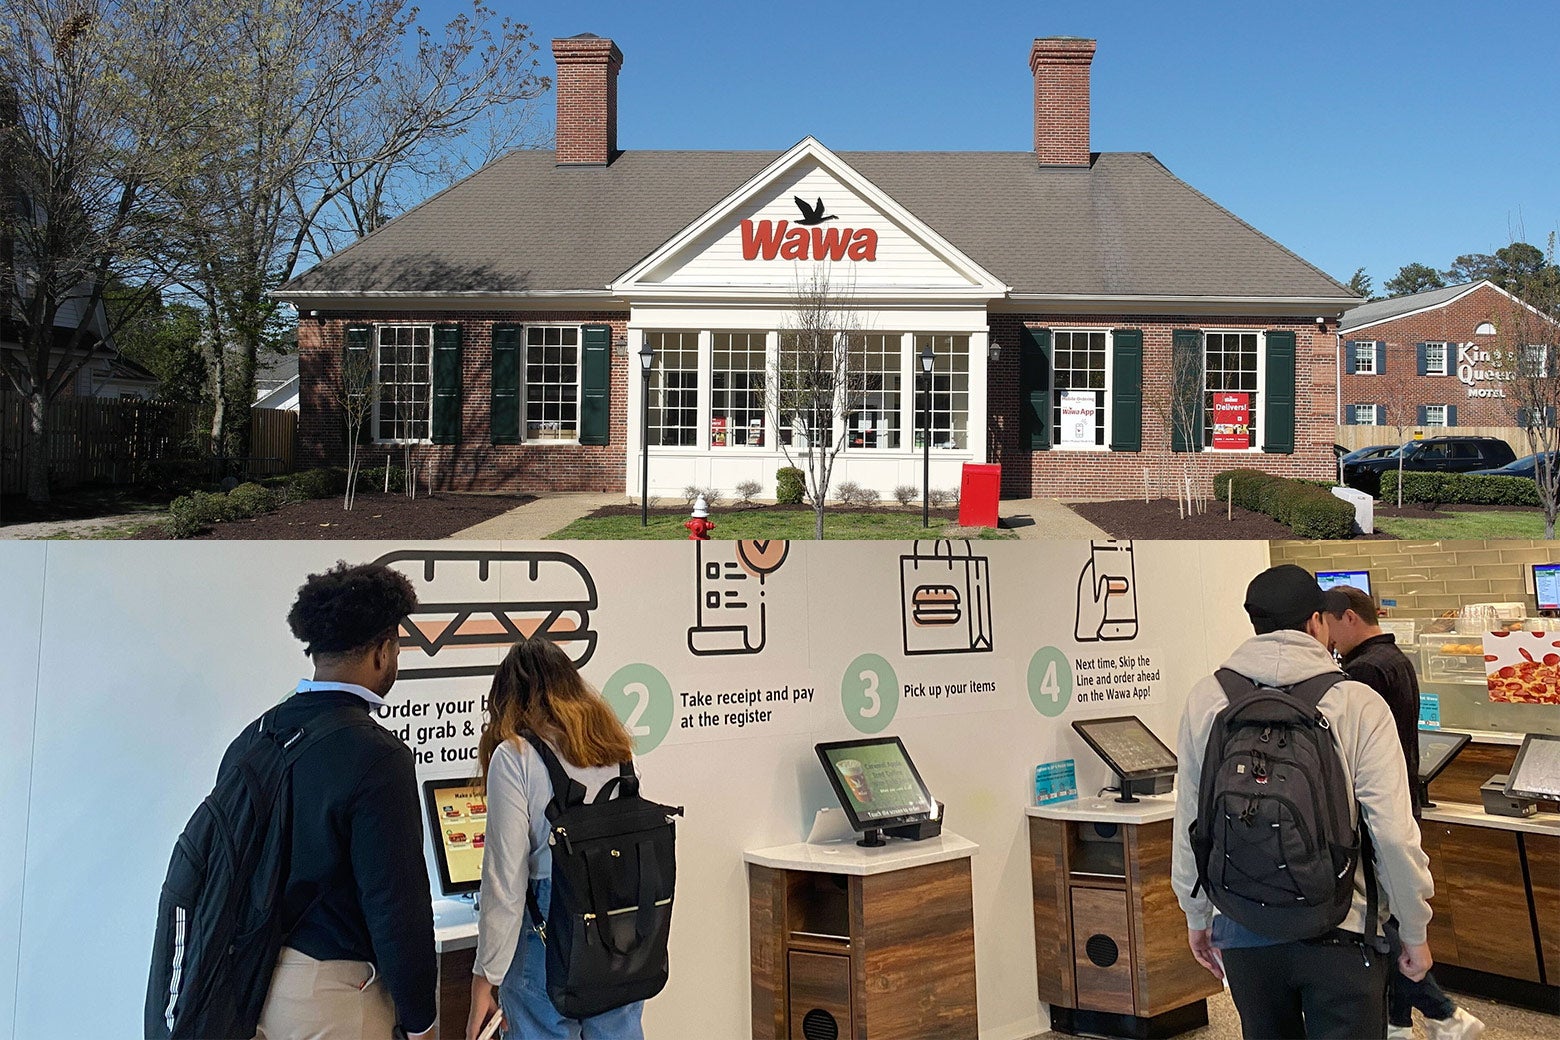 Top: Exterior of a Wawa store. Bottom: Interior of a Wawa store check-out area, with touchscreens and self-check out.